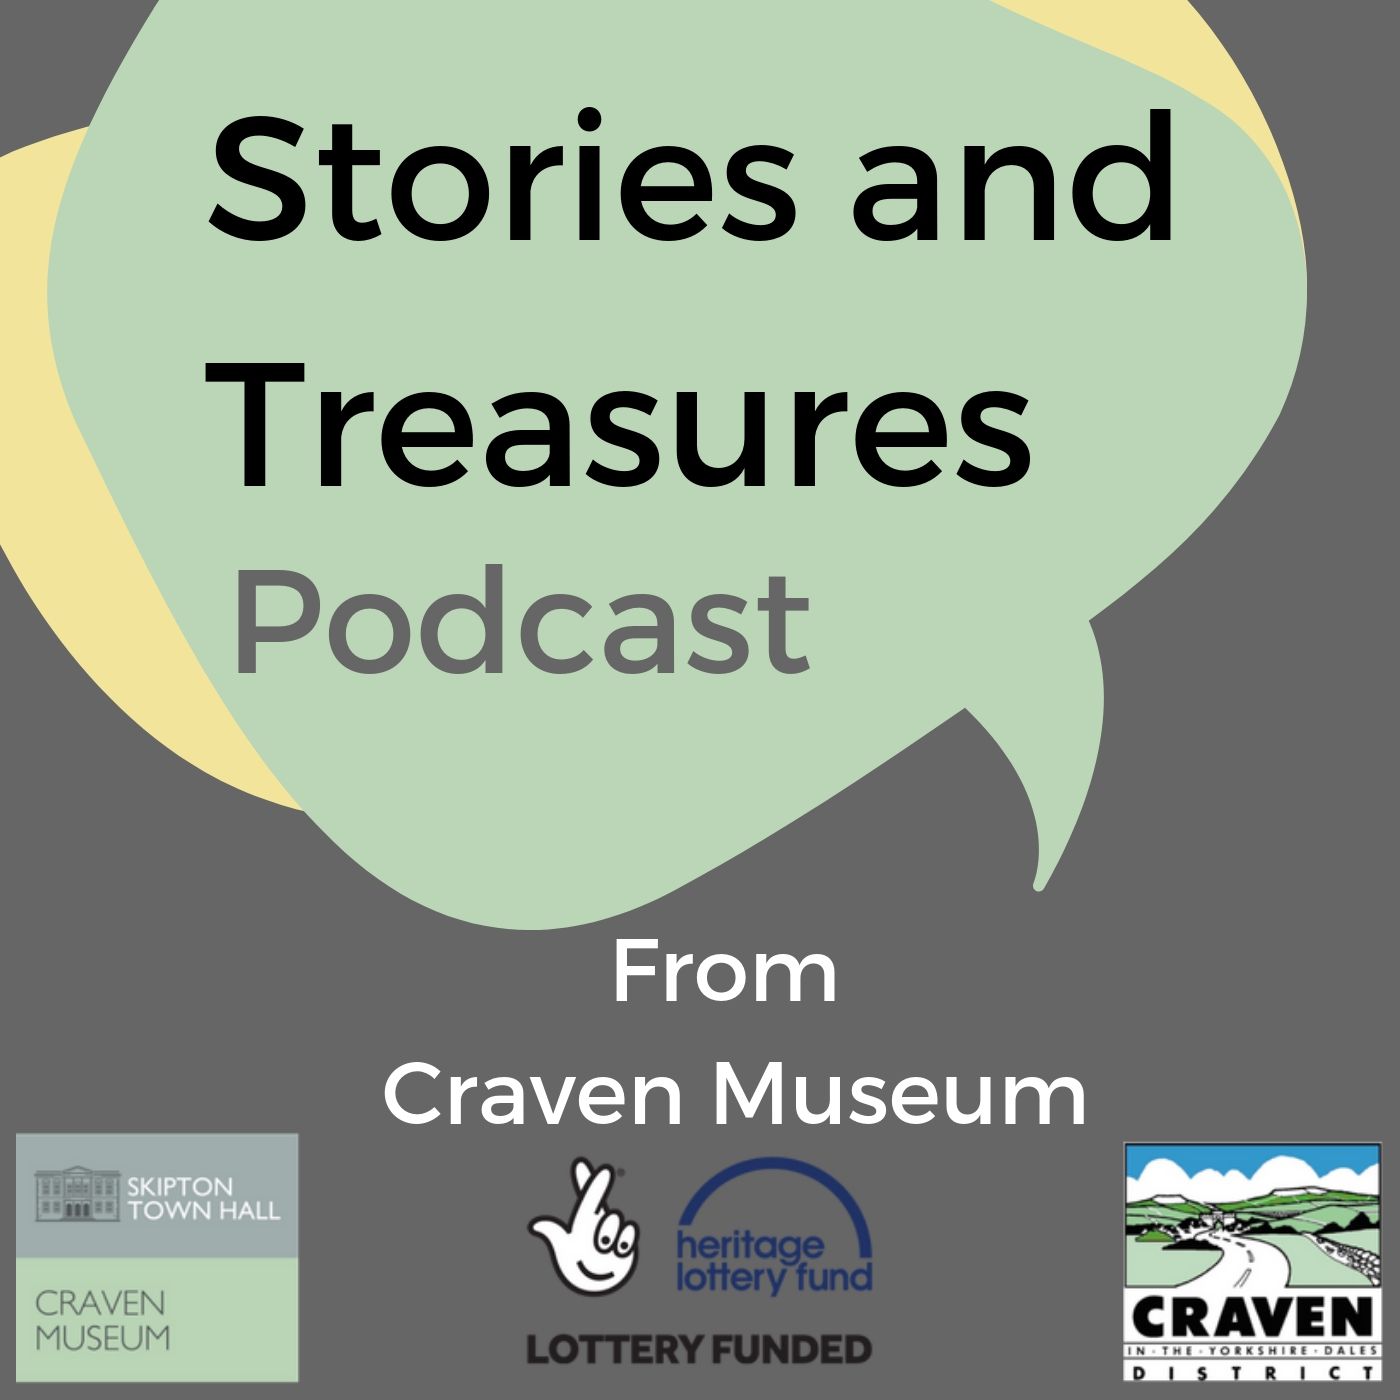 Stories and Treasures